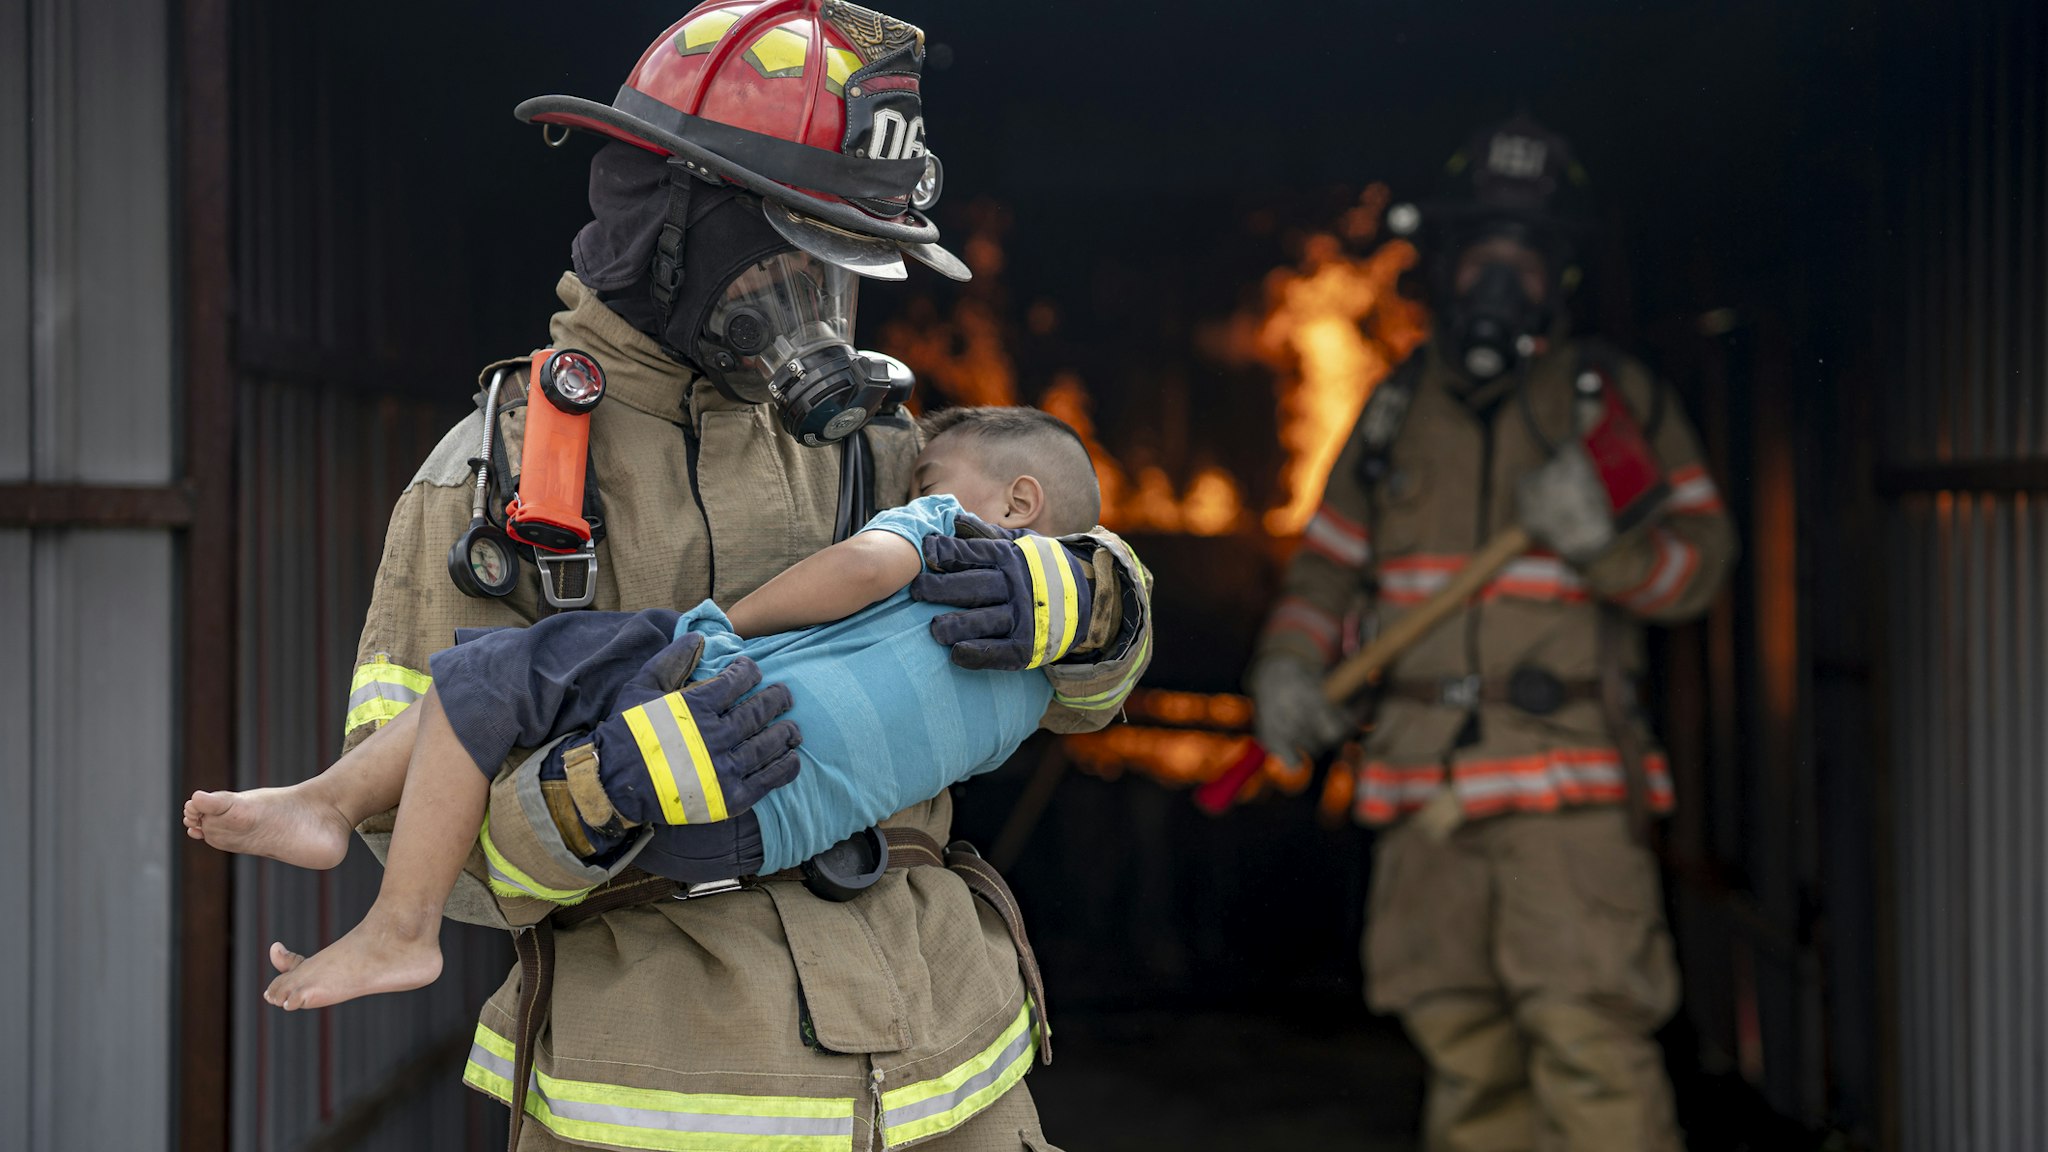 Brave Fireman of a Burning Building and Holds Saved boy in His Arms. Open fire and one Firefighter in the Background.